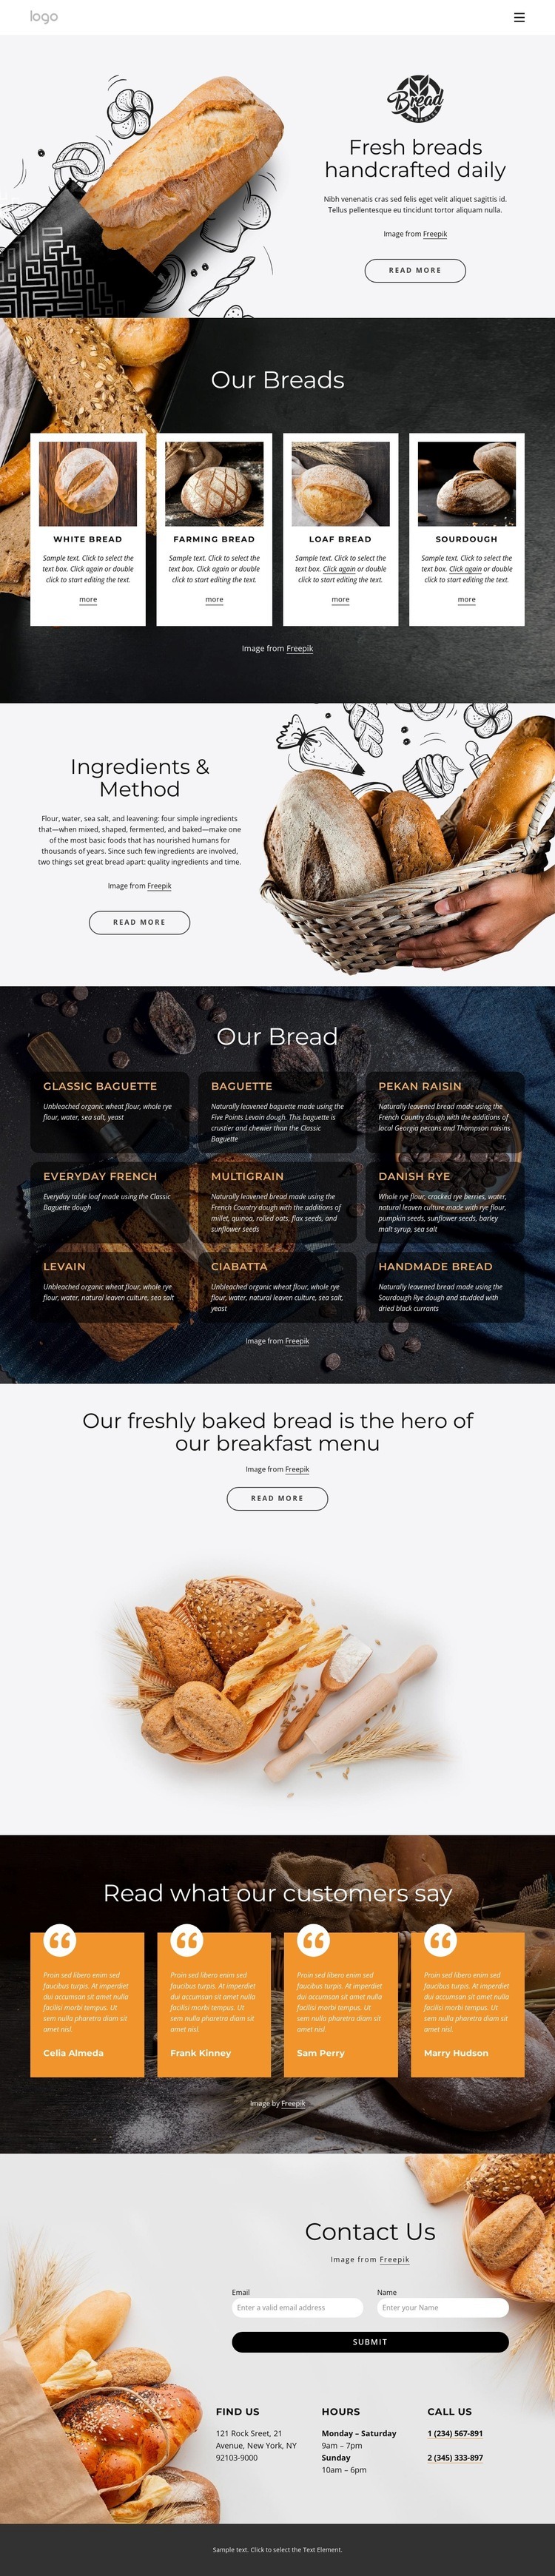 Fresh bread handcrafted every day Webflow Template Alternative